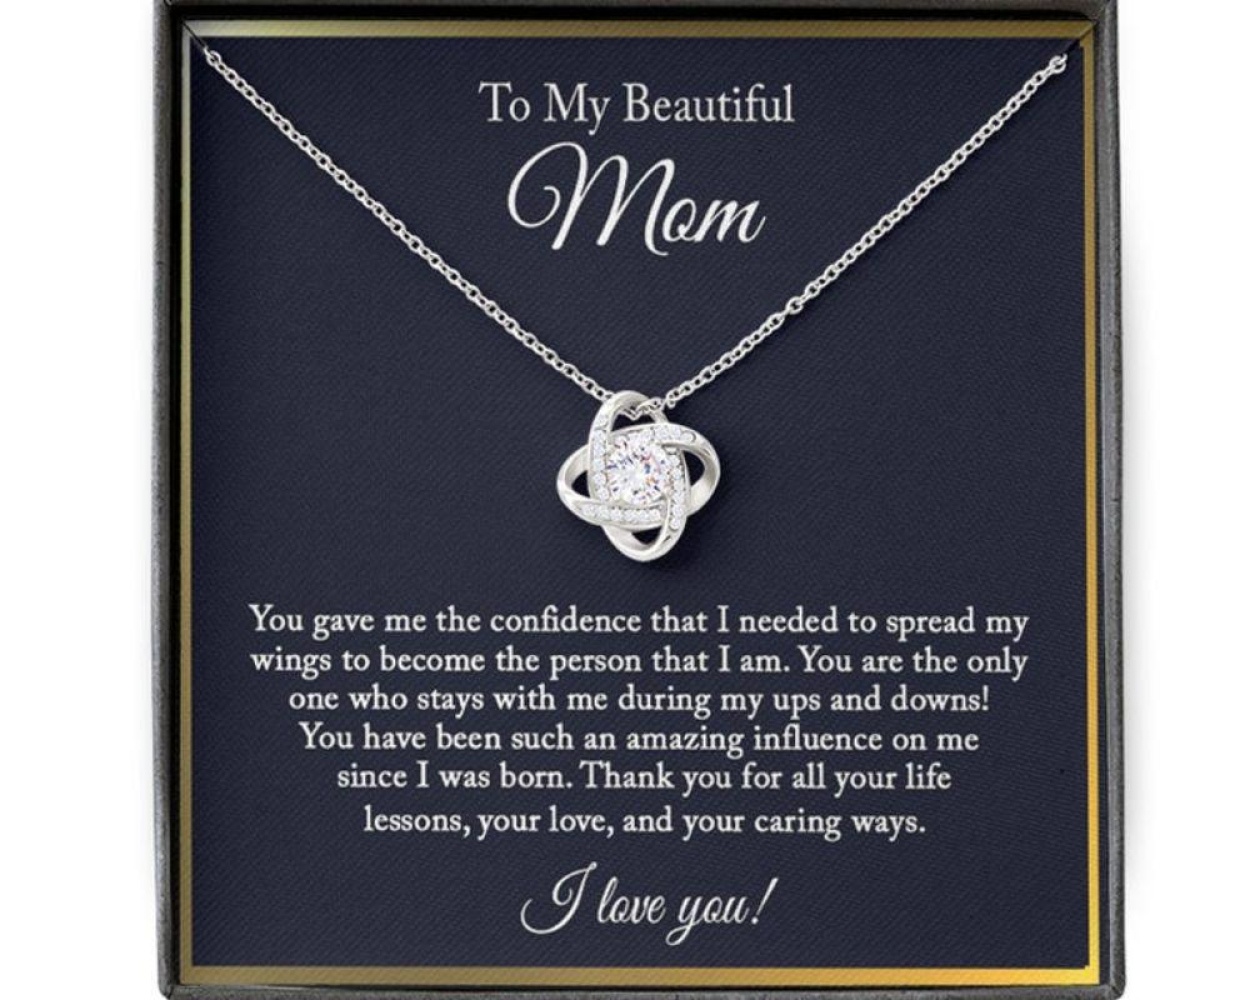 Mom Necklace, To My Beautiful Mom Necklace, Mom Birthday Gift From Daughter Son